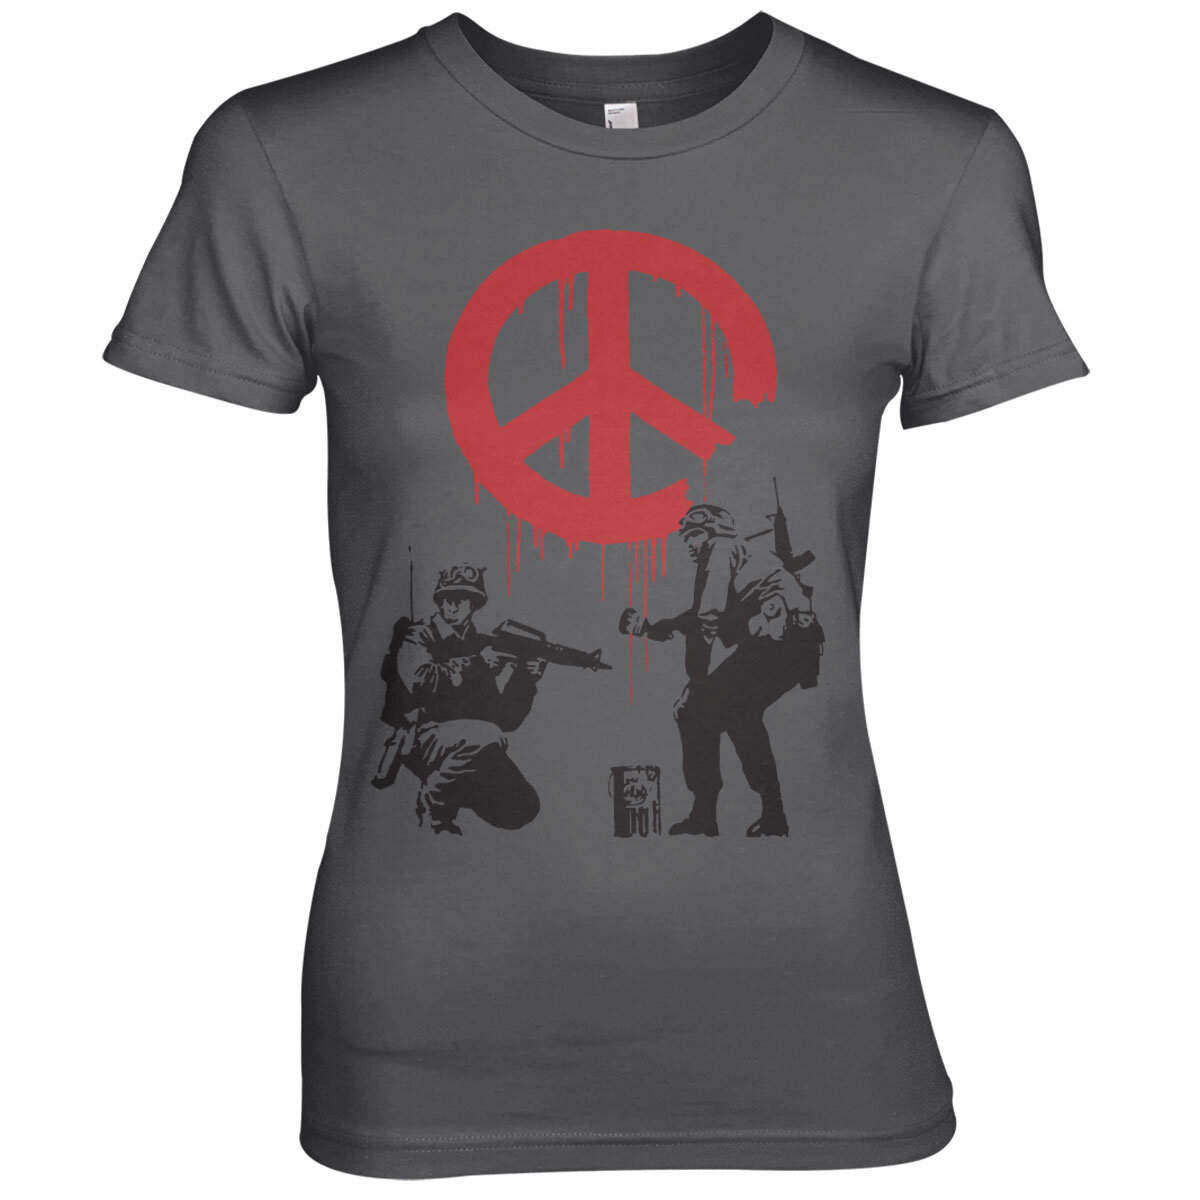 Soldiers Painting CND Sign Girly Tee